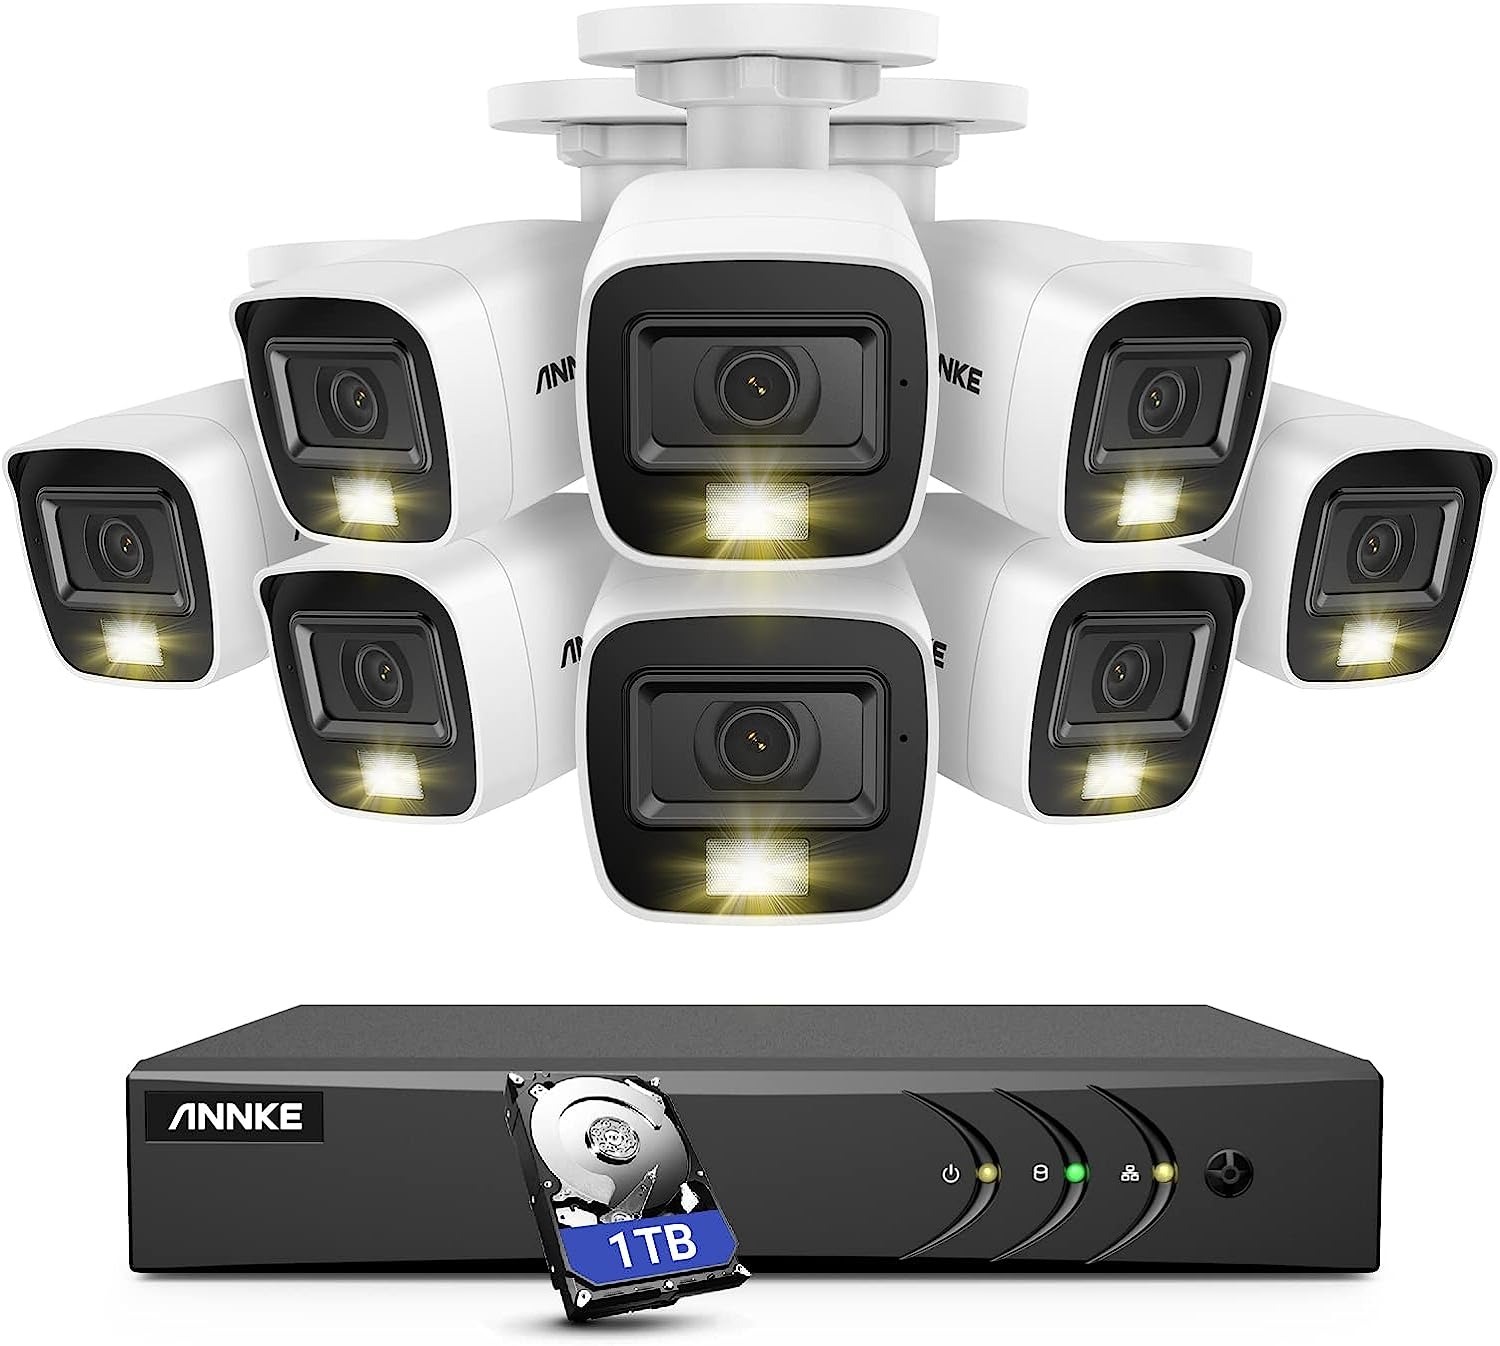 Prime Members: ANNKE Amazon Home Wired Camera Security System with Audio $240 + Free Shipping